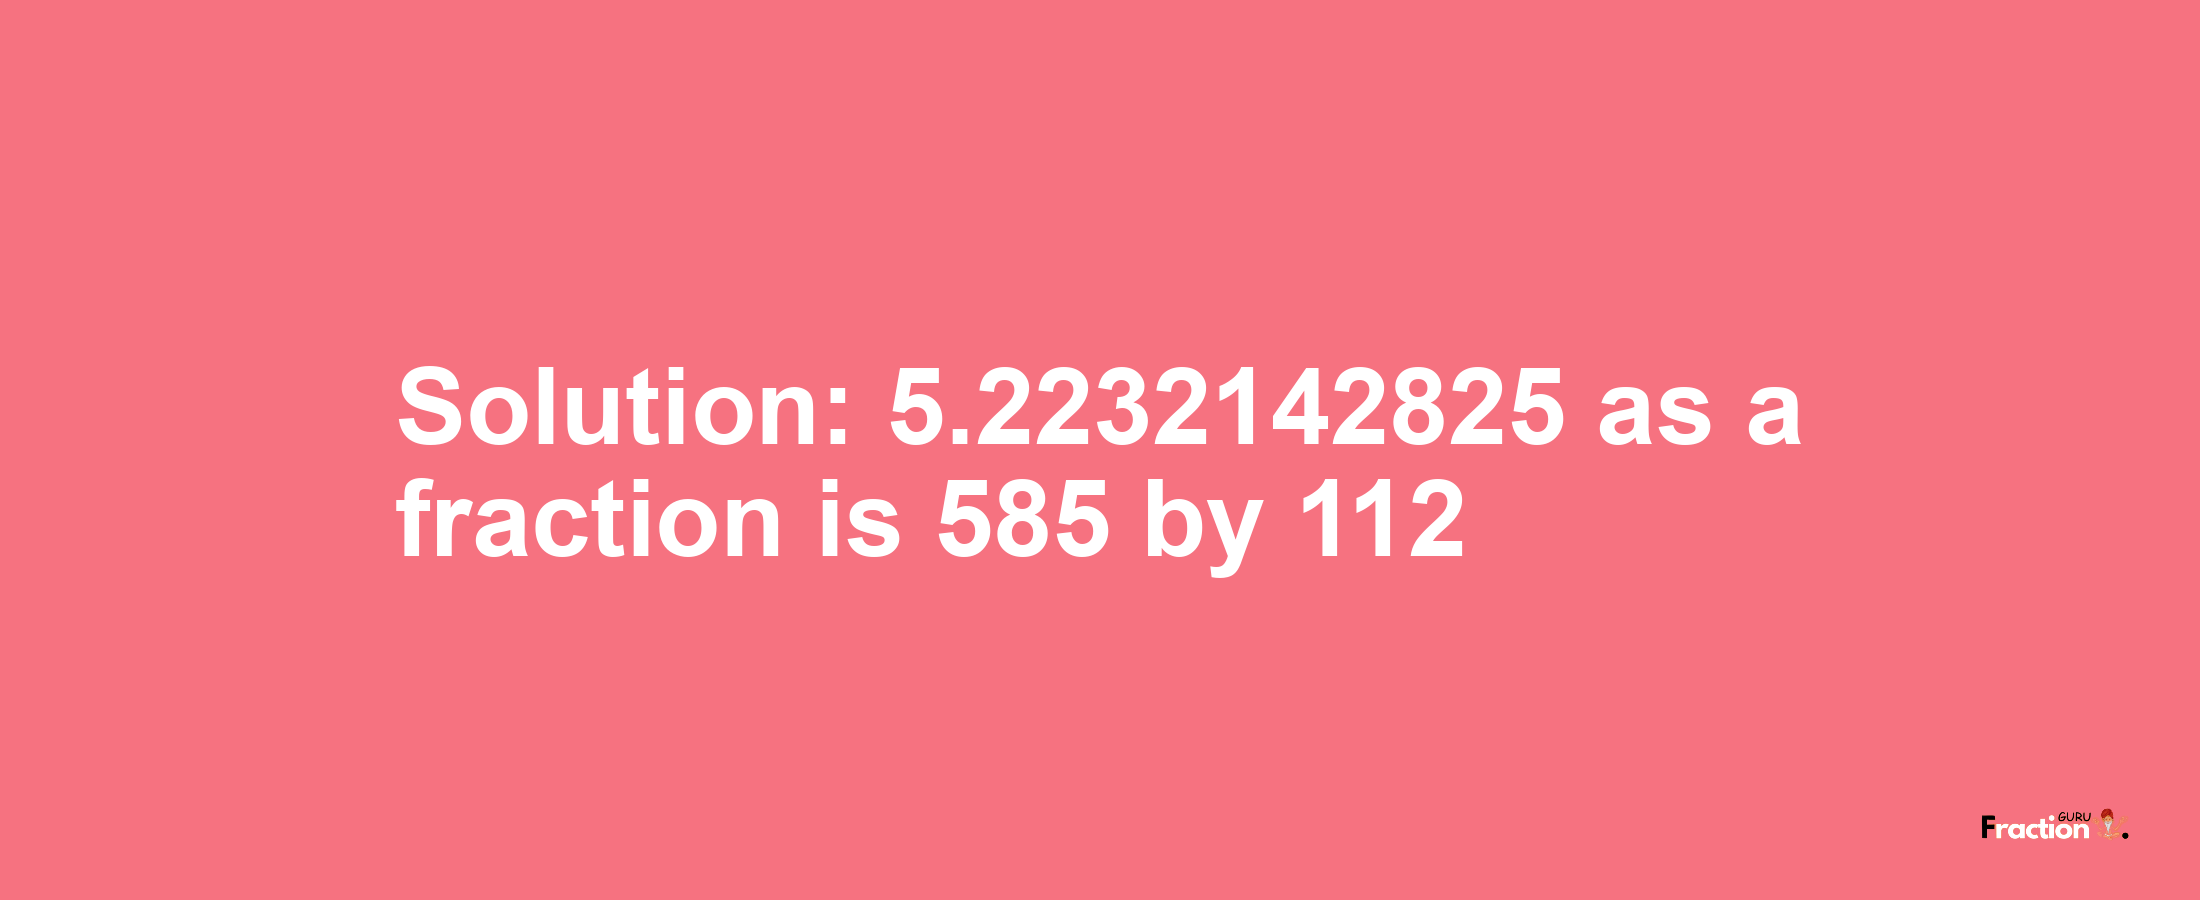 Solution:5.2232142825 as a fraction is 585/112